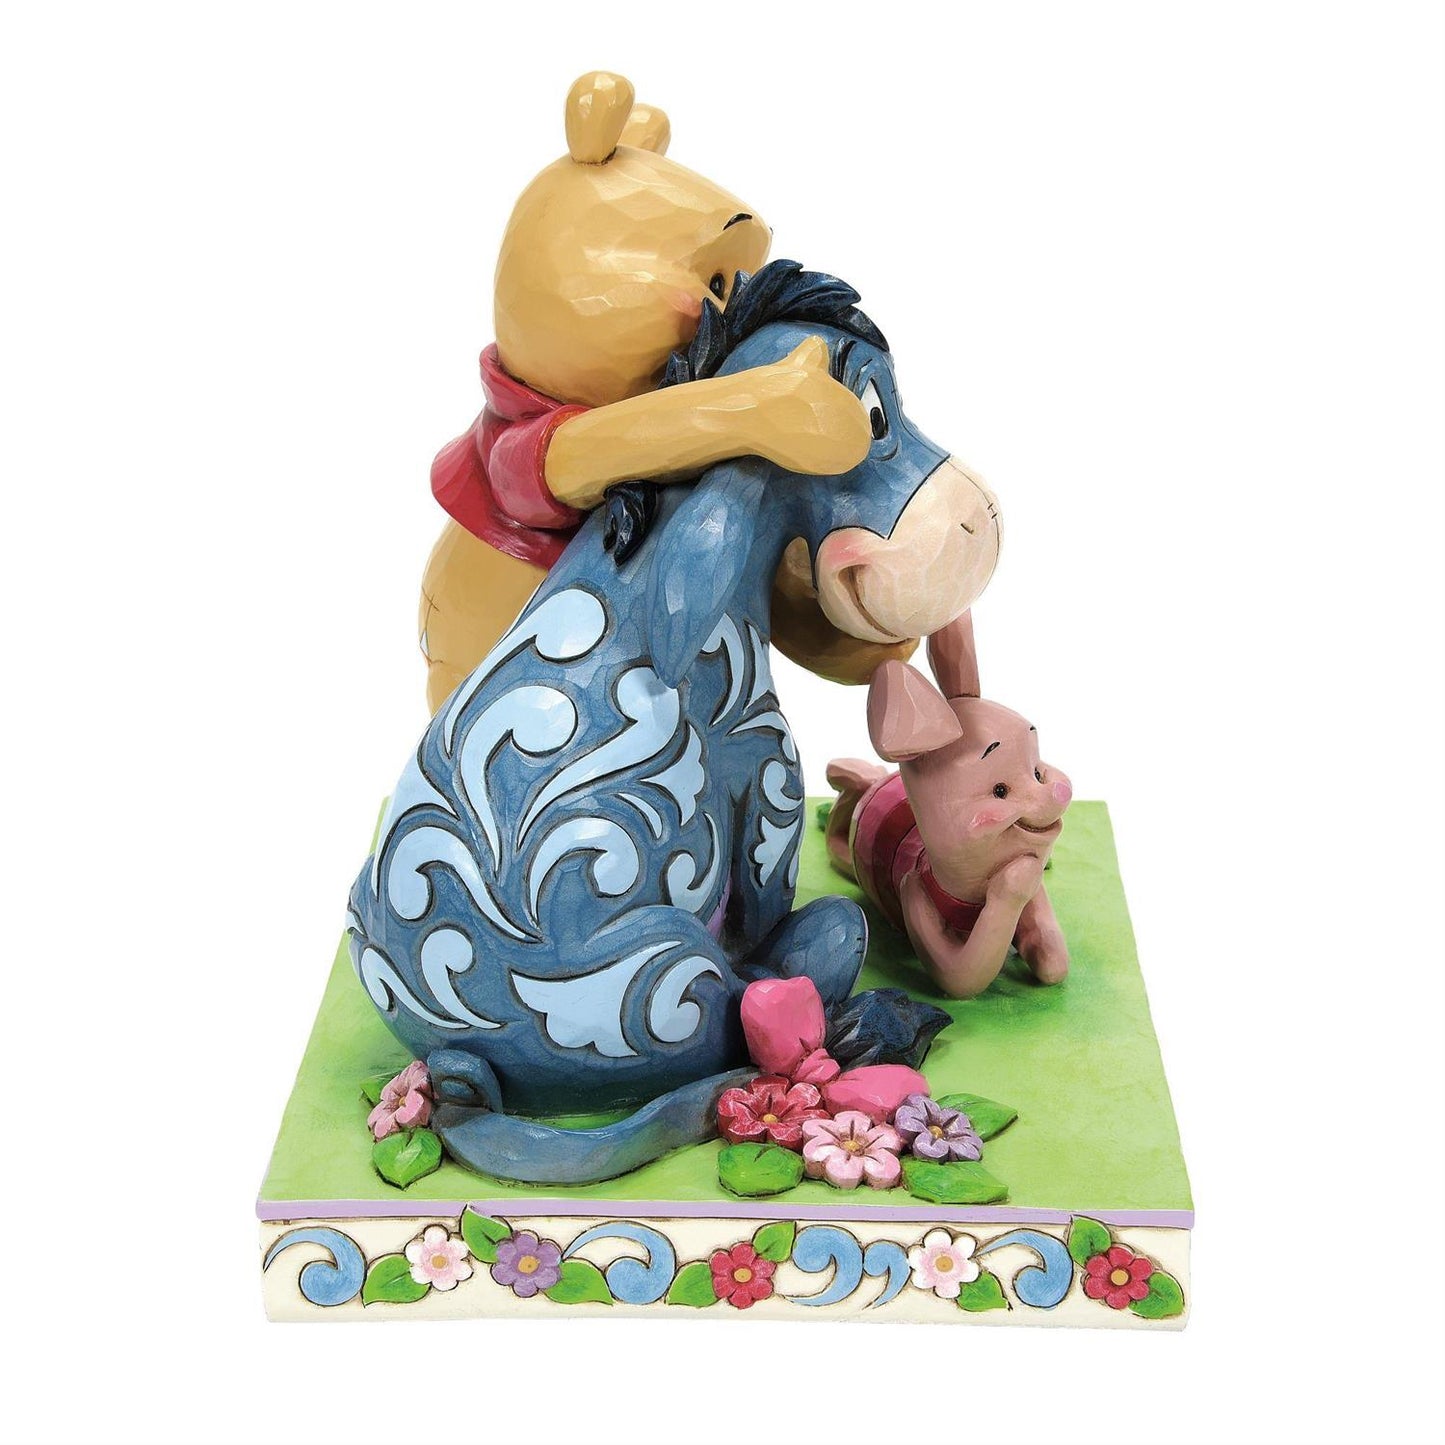 Jim Shore Winnie the Pooh Here Together, Friends Forever Figurine